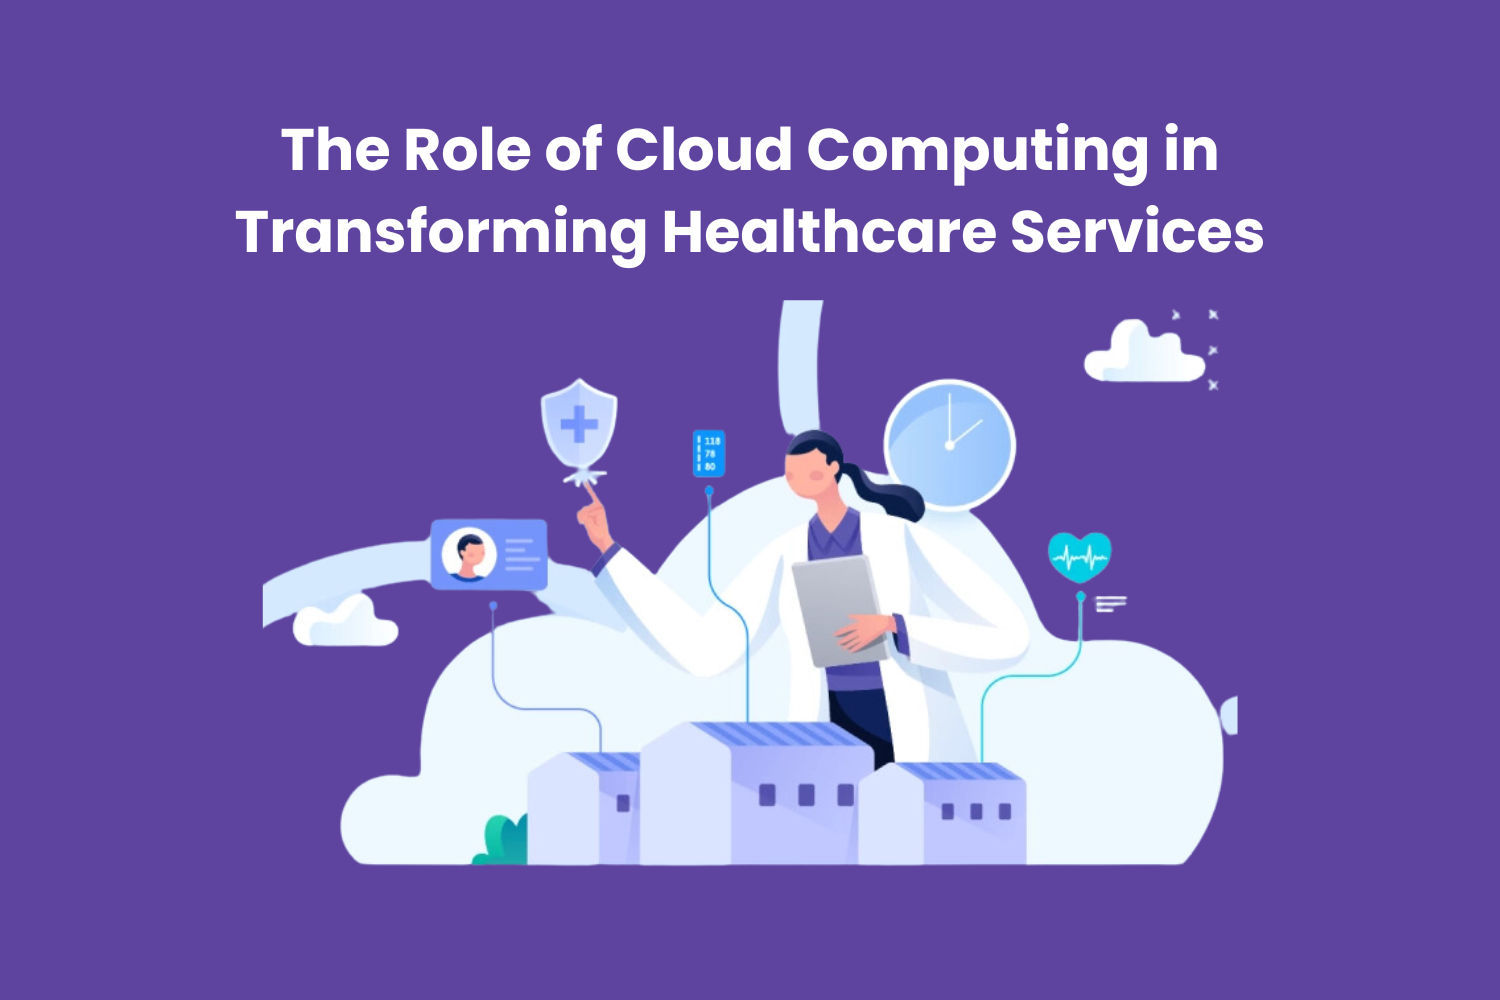 The Role of Cloud Computing in Transforming Healthcare Services